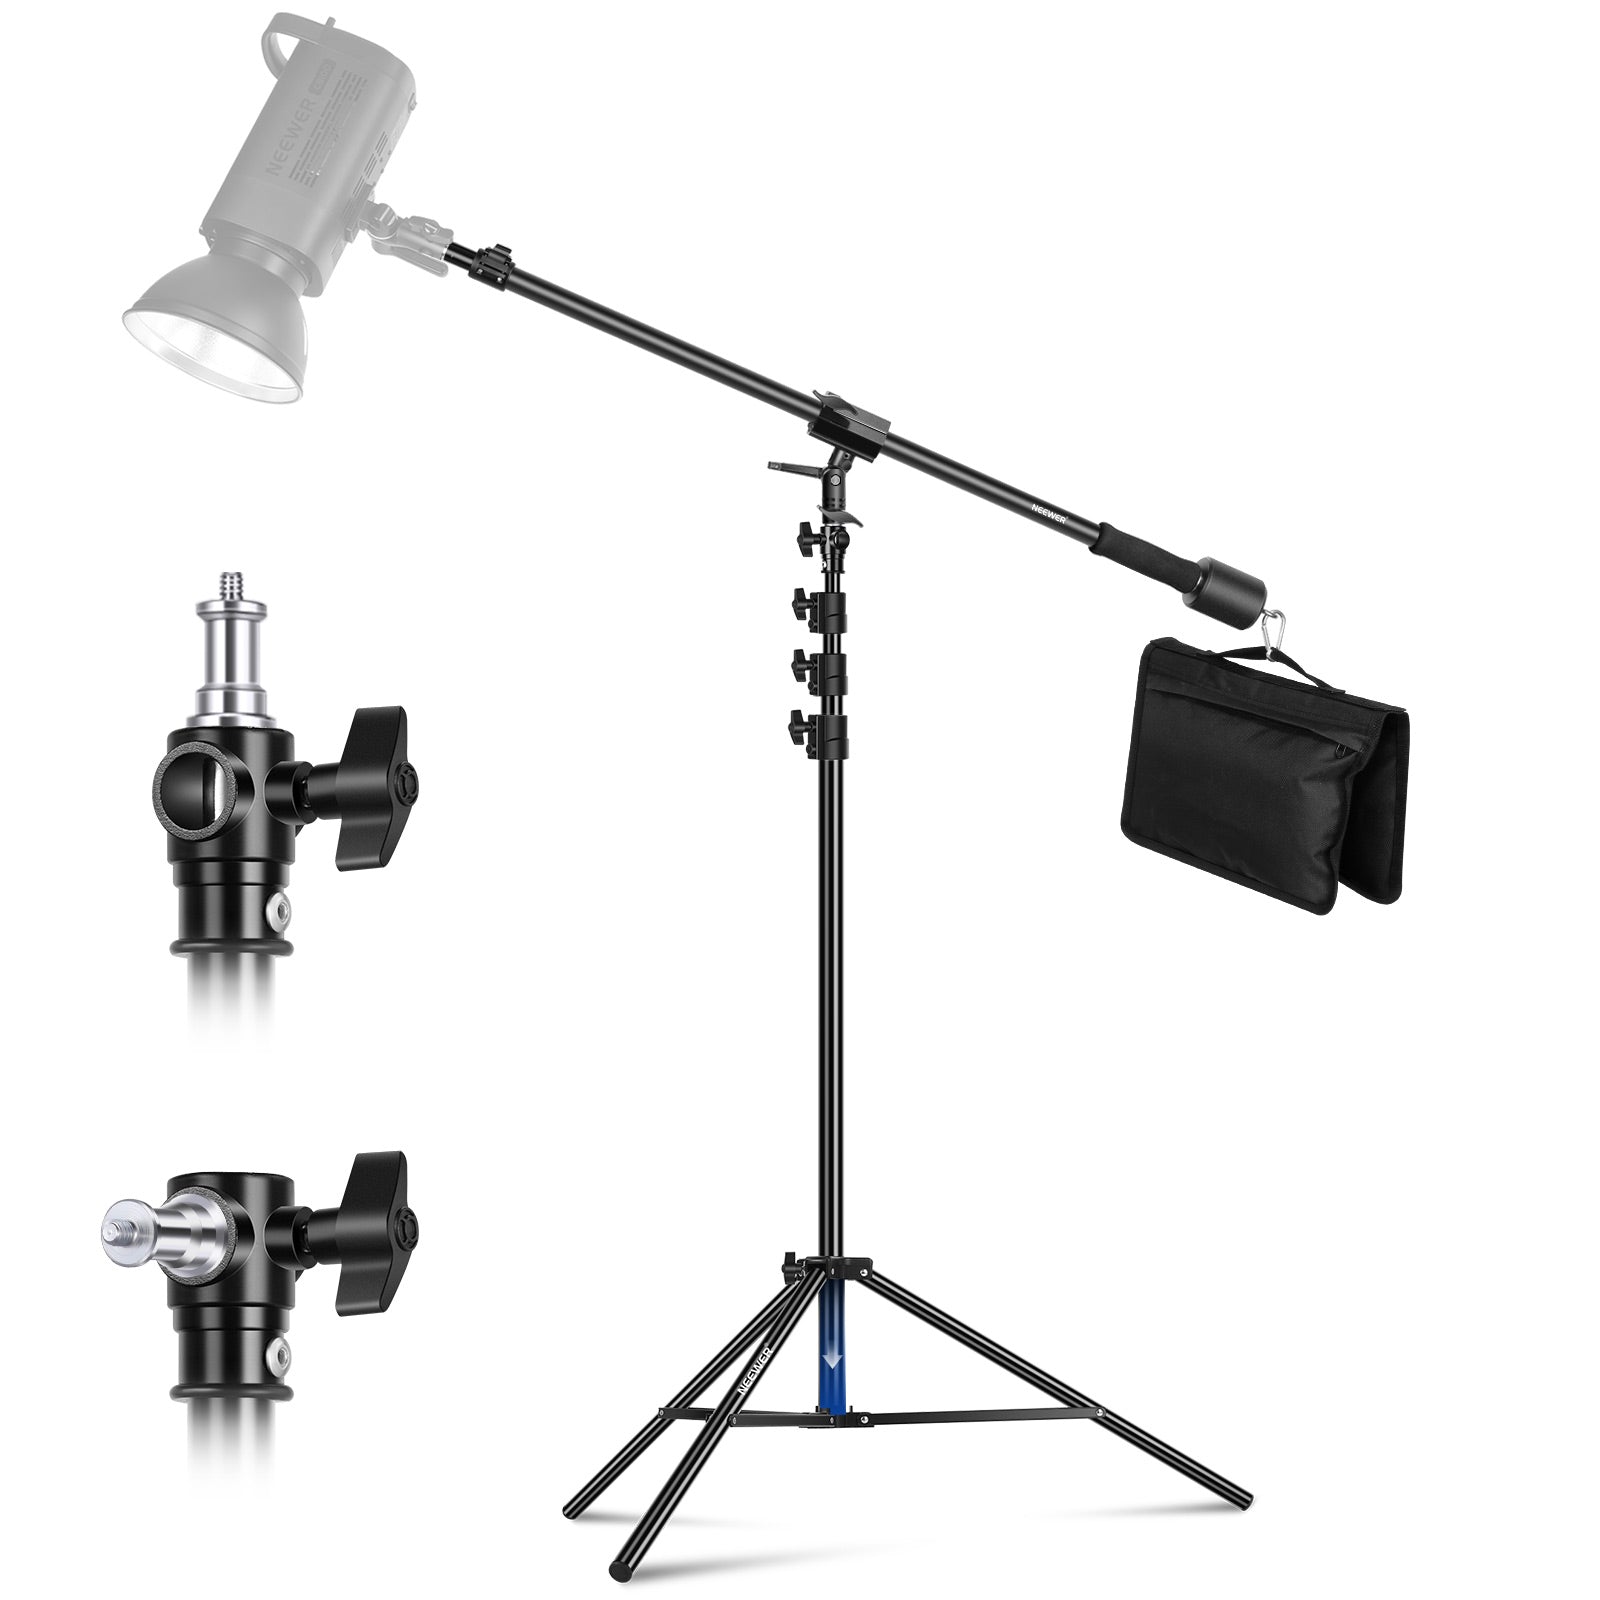 Neewer 2-Pack Heavy Duty Light Stand C-Stand - Max. 10 Feet/3